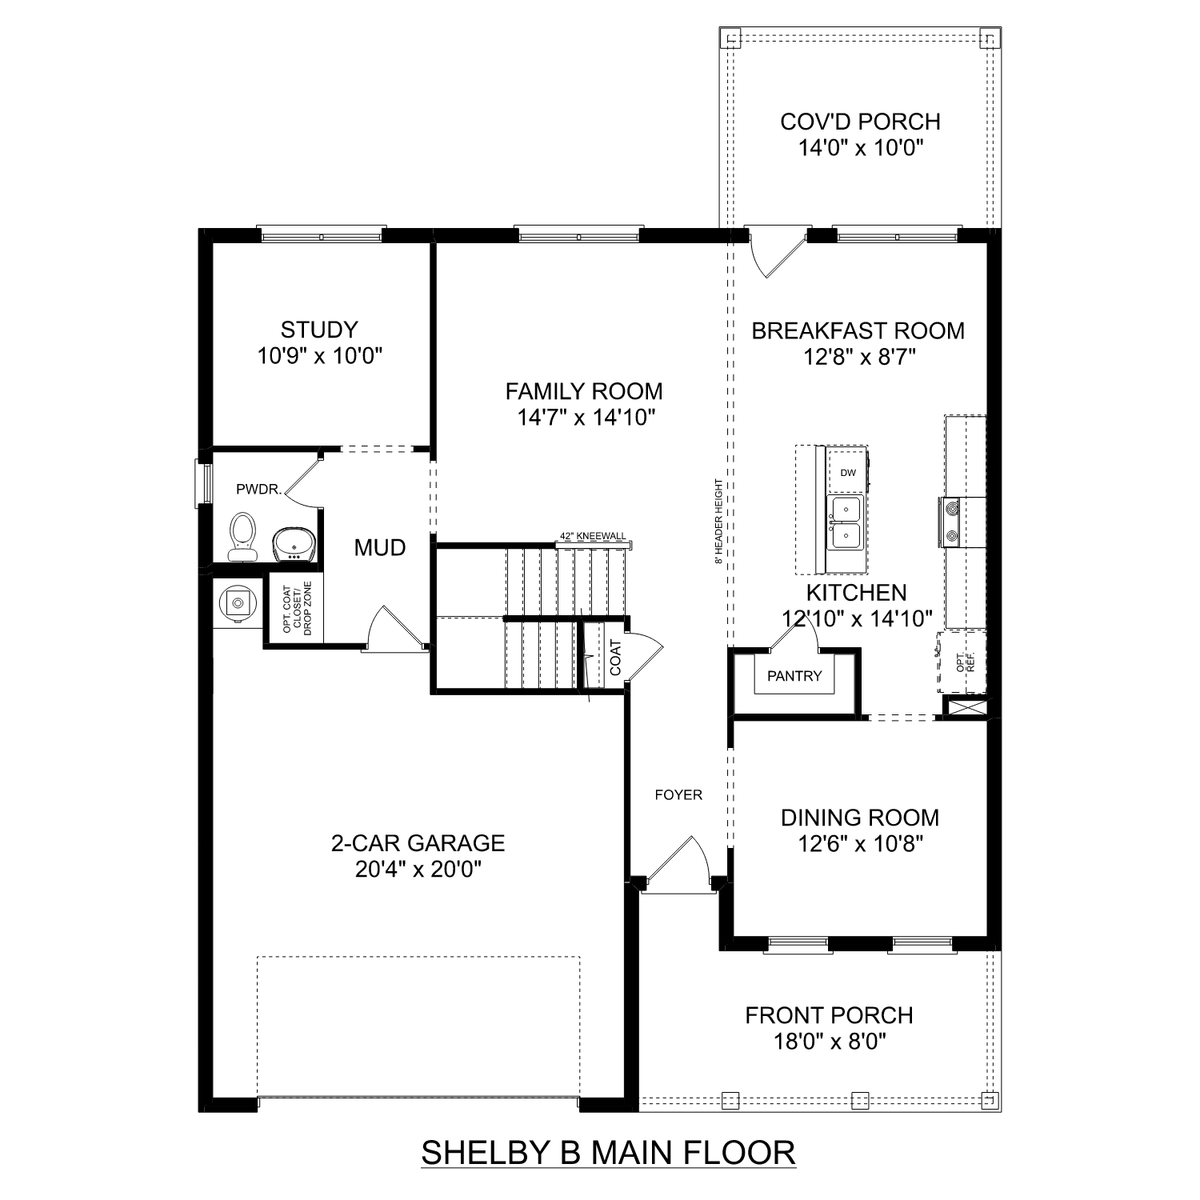 1 - The Shelby B floor plan layout for 26658 Kyle Lane in Davidson Homes' Ricketts Farm community.